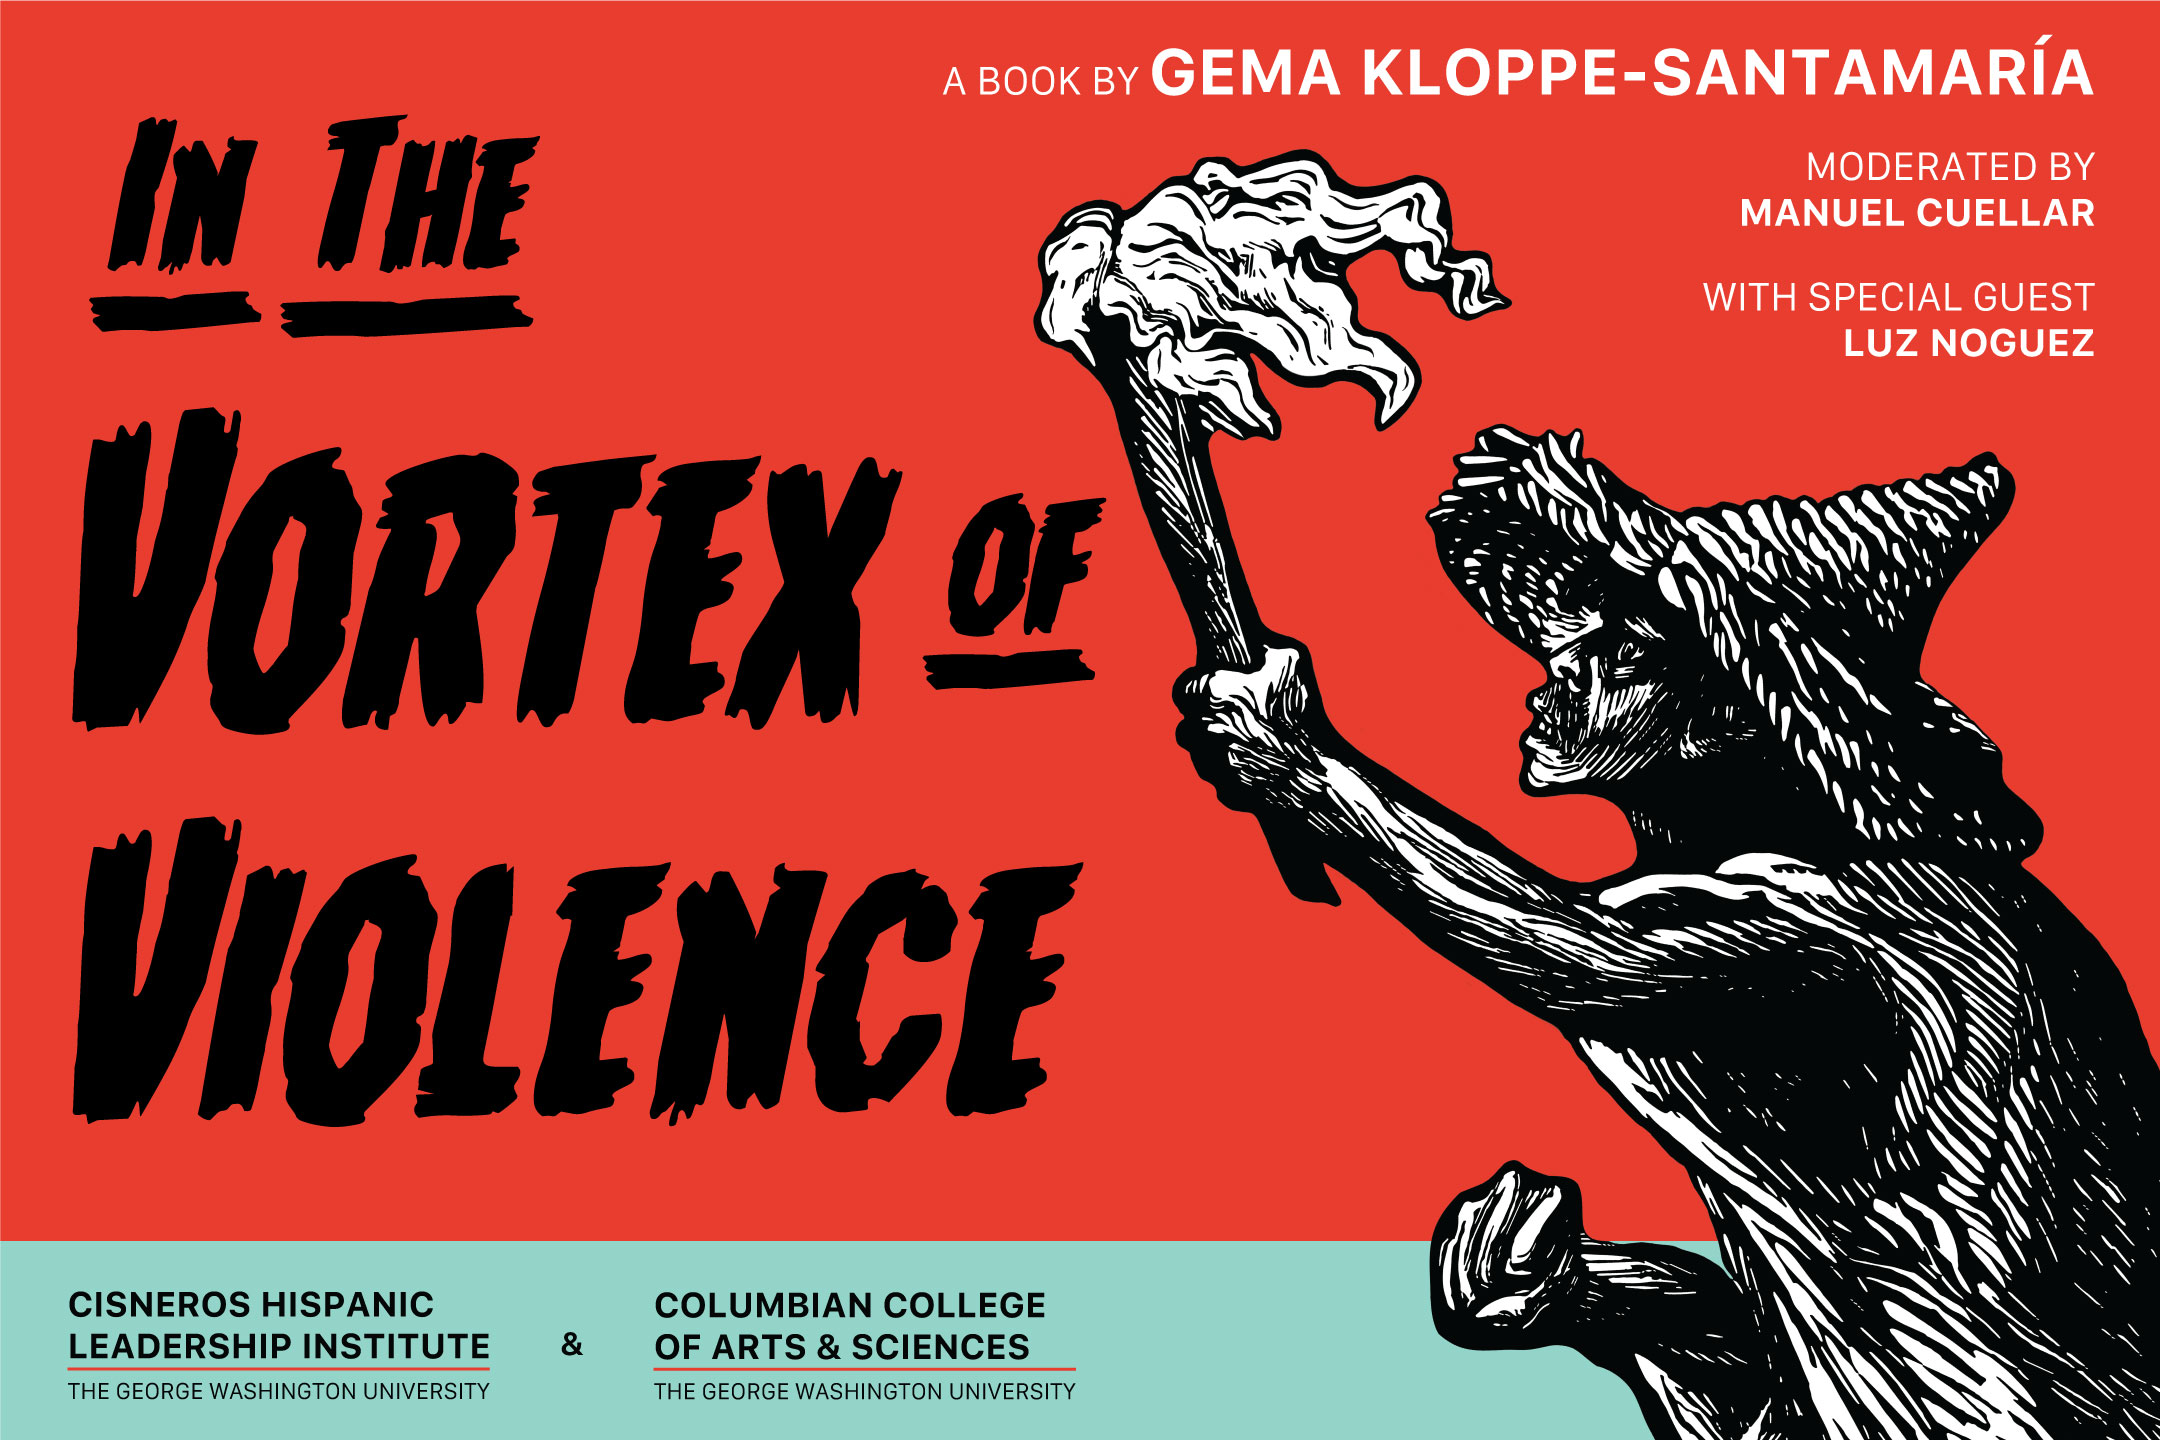 Flyer for "In the Vortex of Violence"